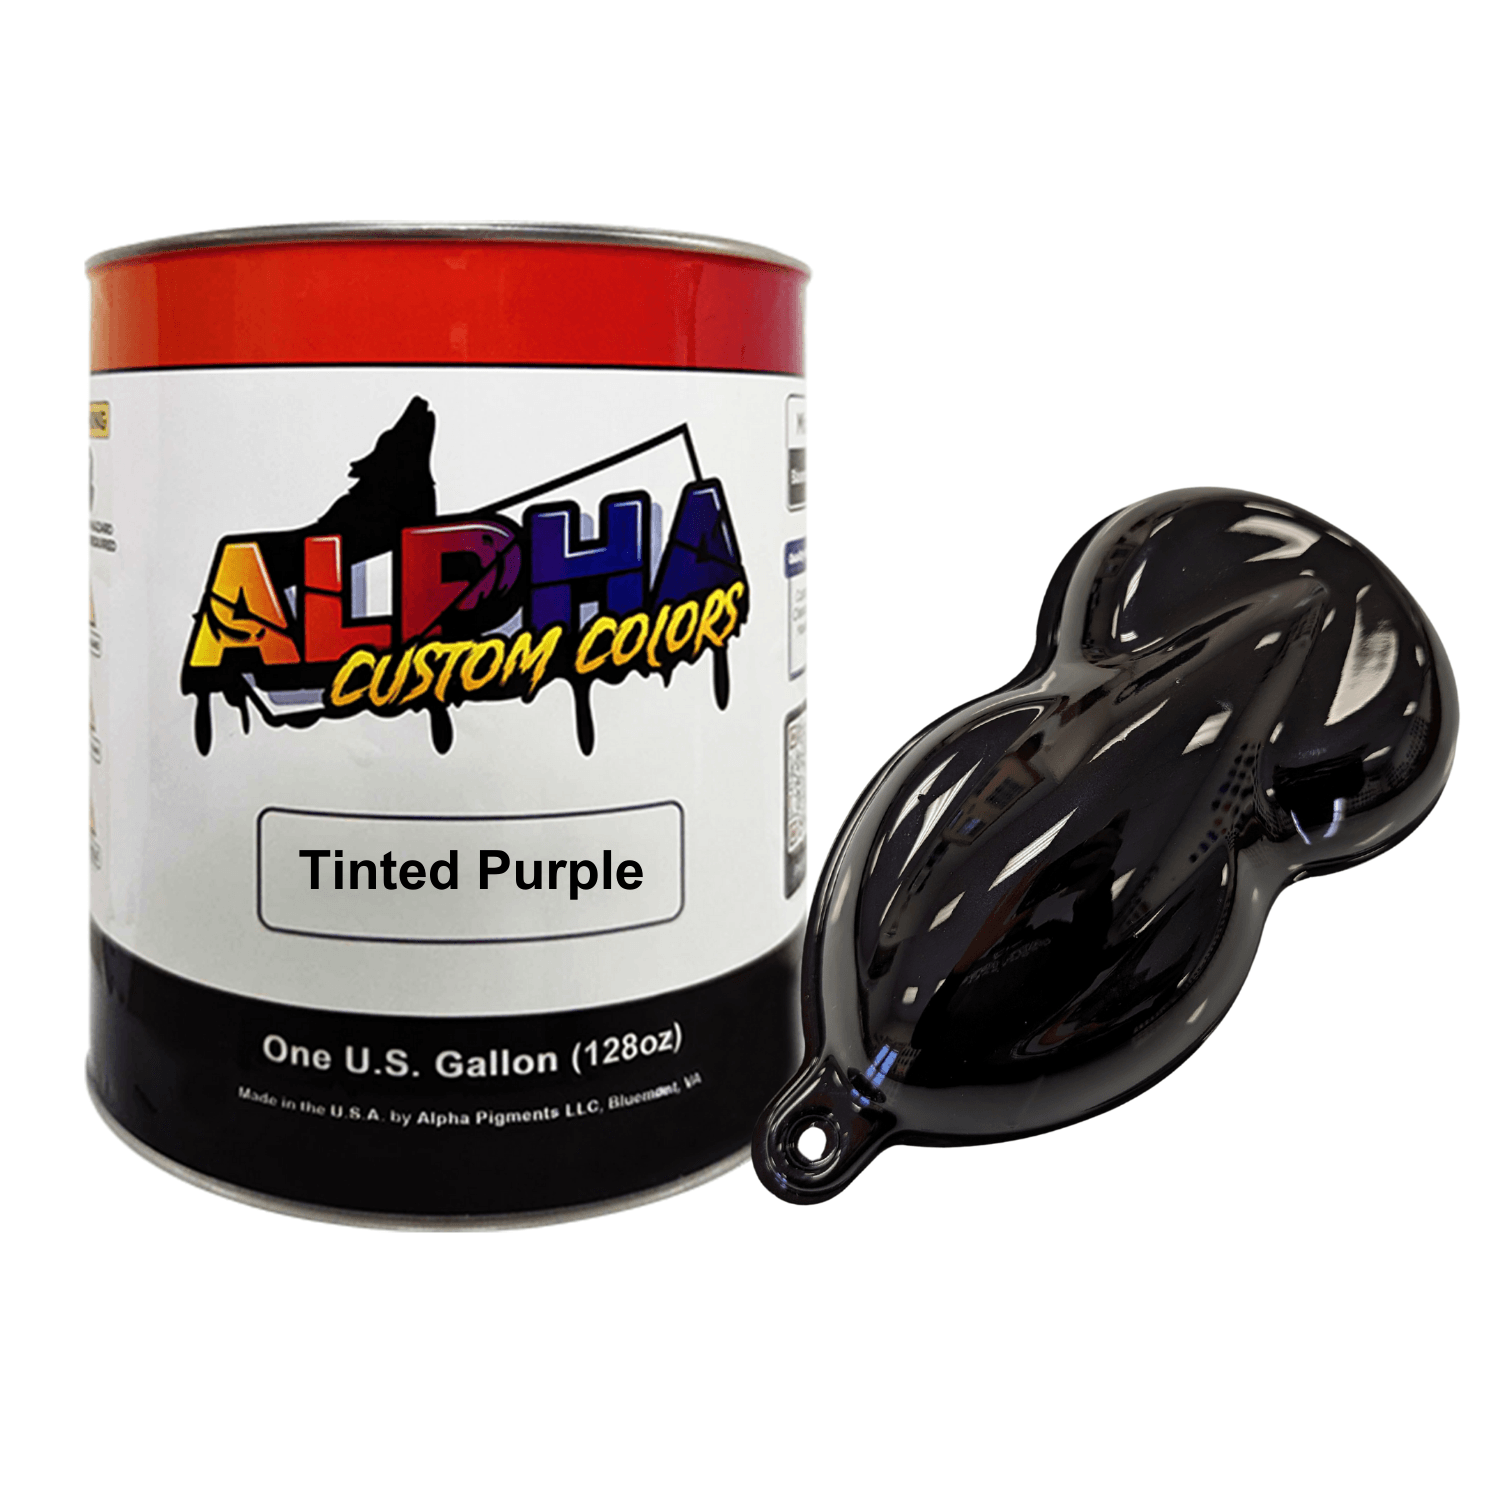 Tinted Purple Paint Basecoat - The Spray Source - Alpha Pigments